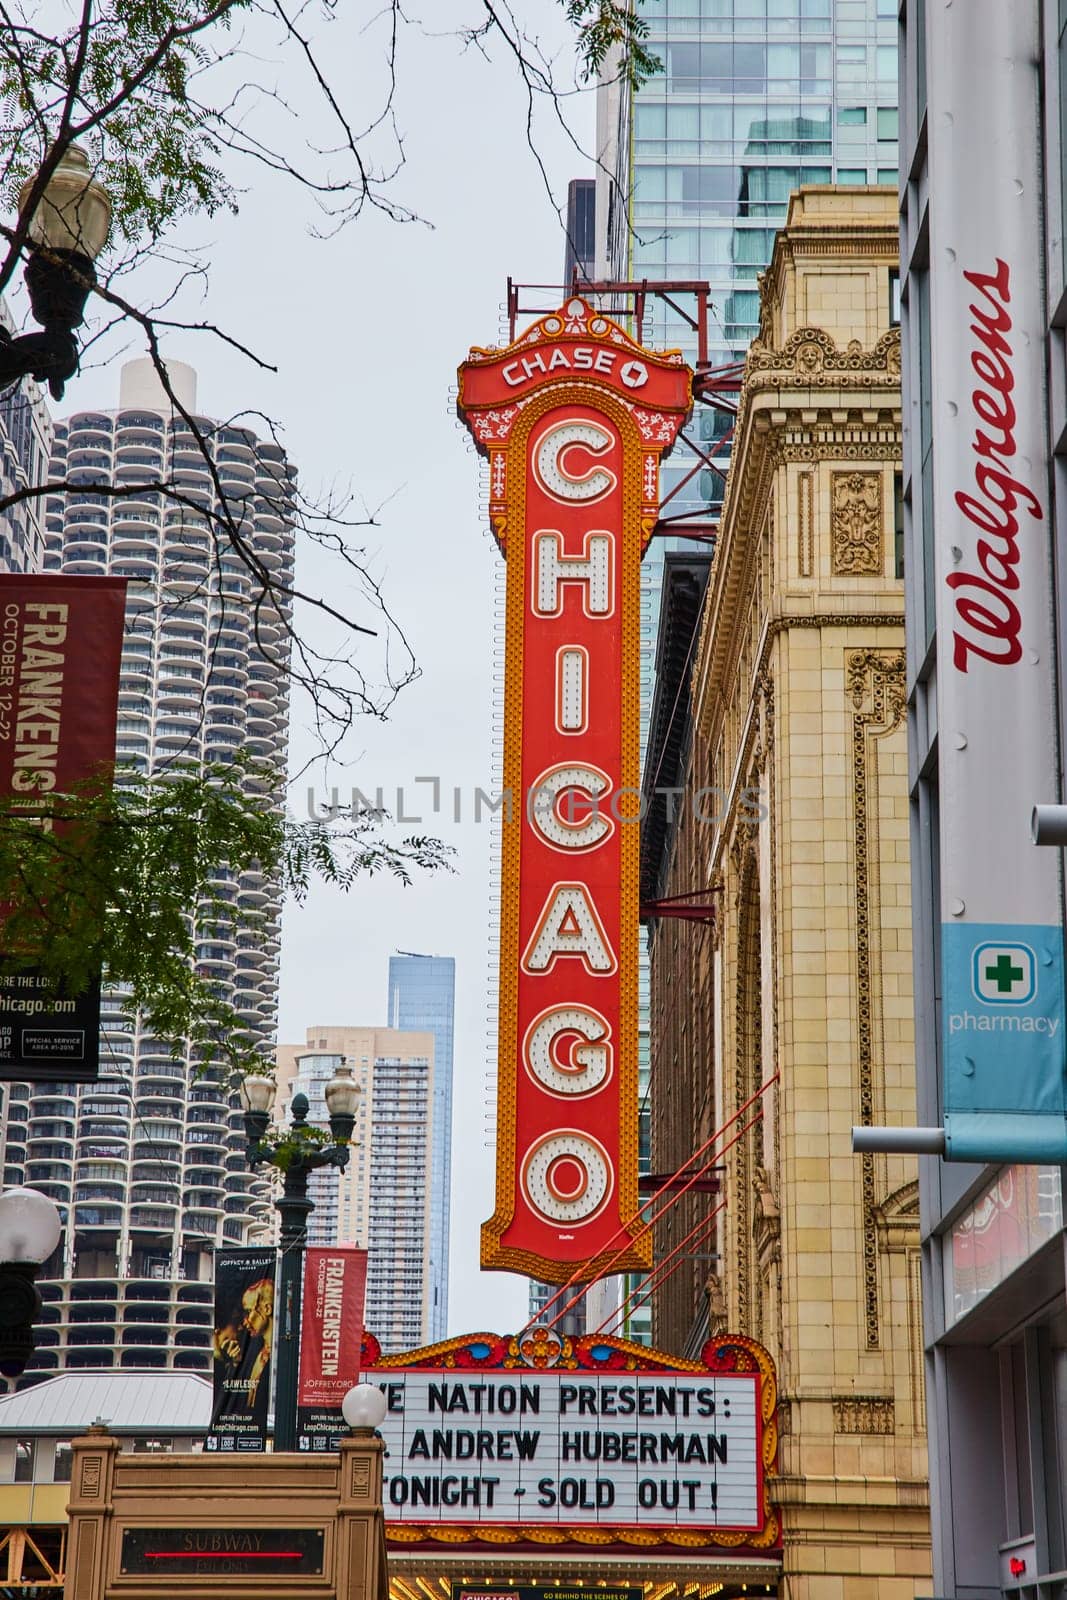 Large orange and yellow Chicago sign with white lettering above a theatre by njproductions